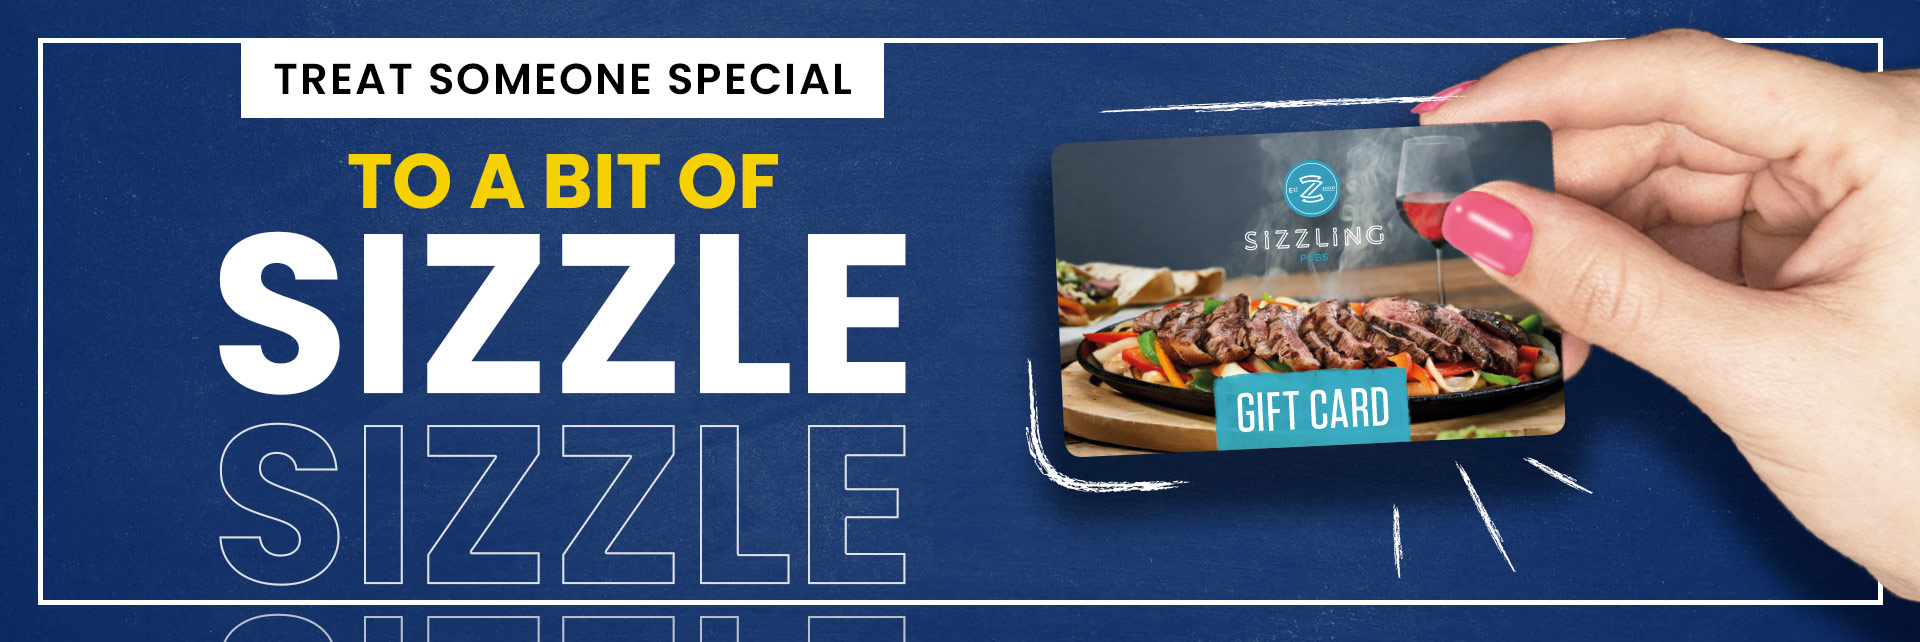 Sizzling Pubs Gift Card at The Meadow Lark in Dudley